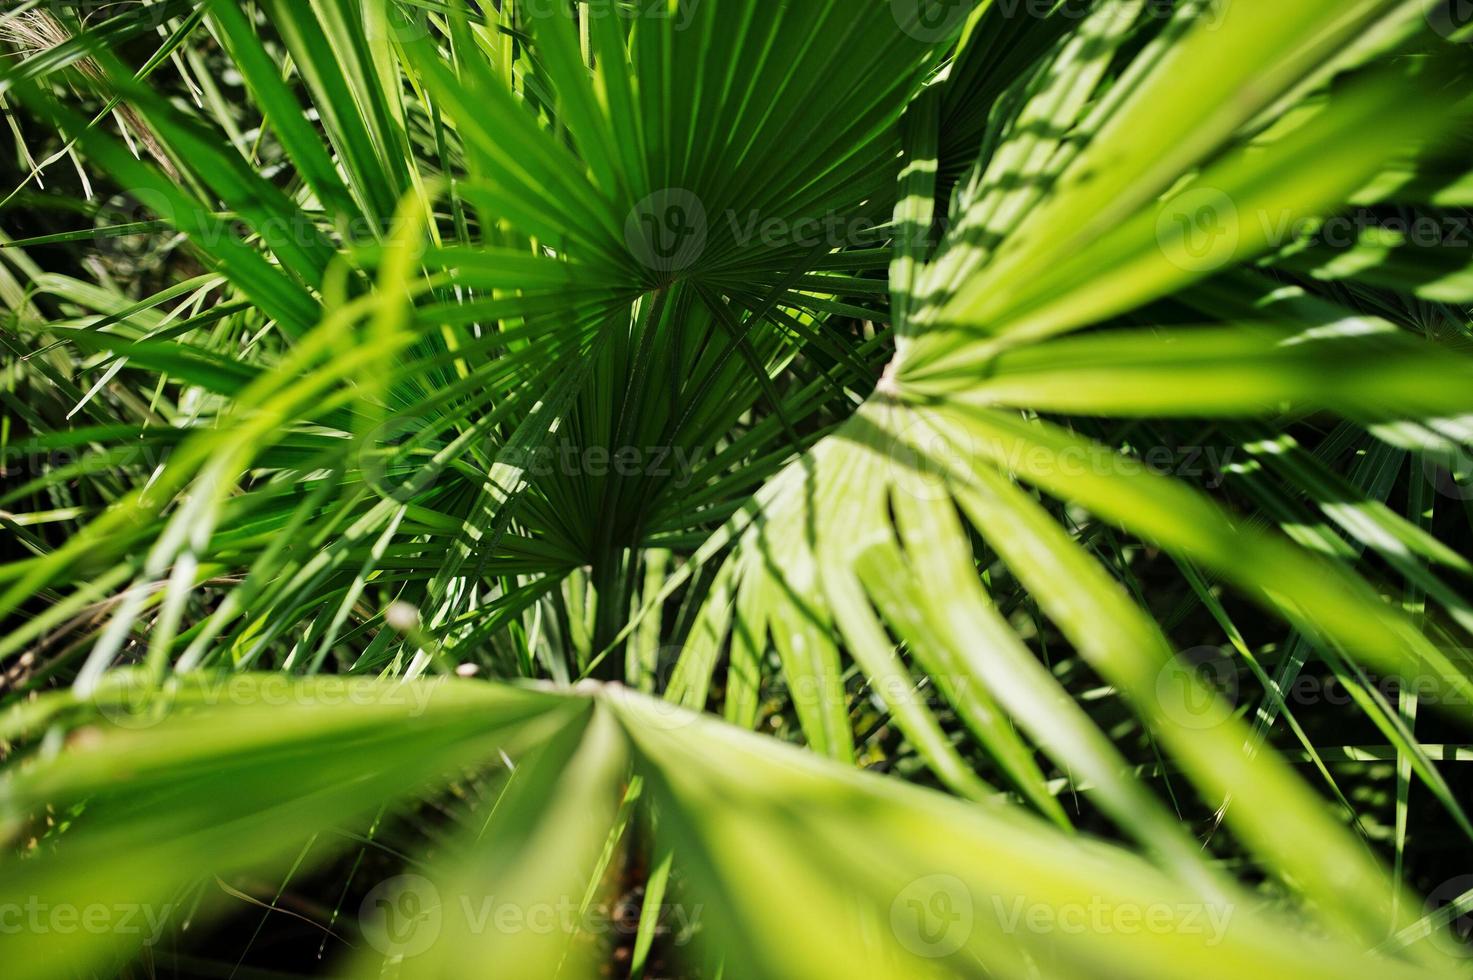 Close-up photo of vibrant green tropical palm leaves.